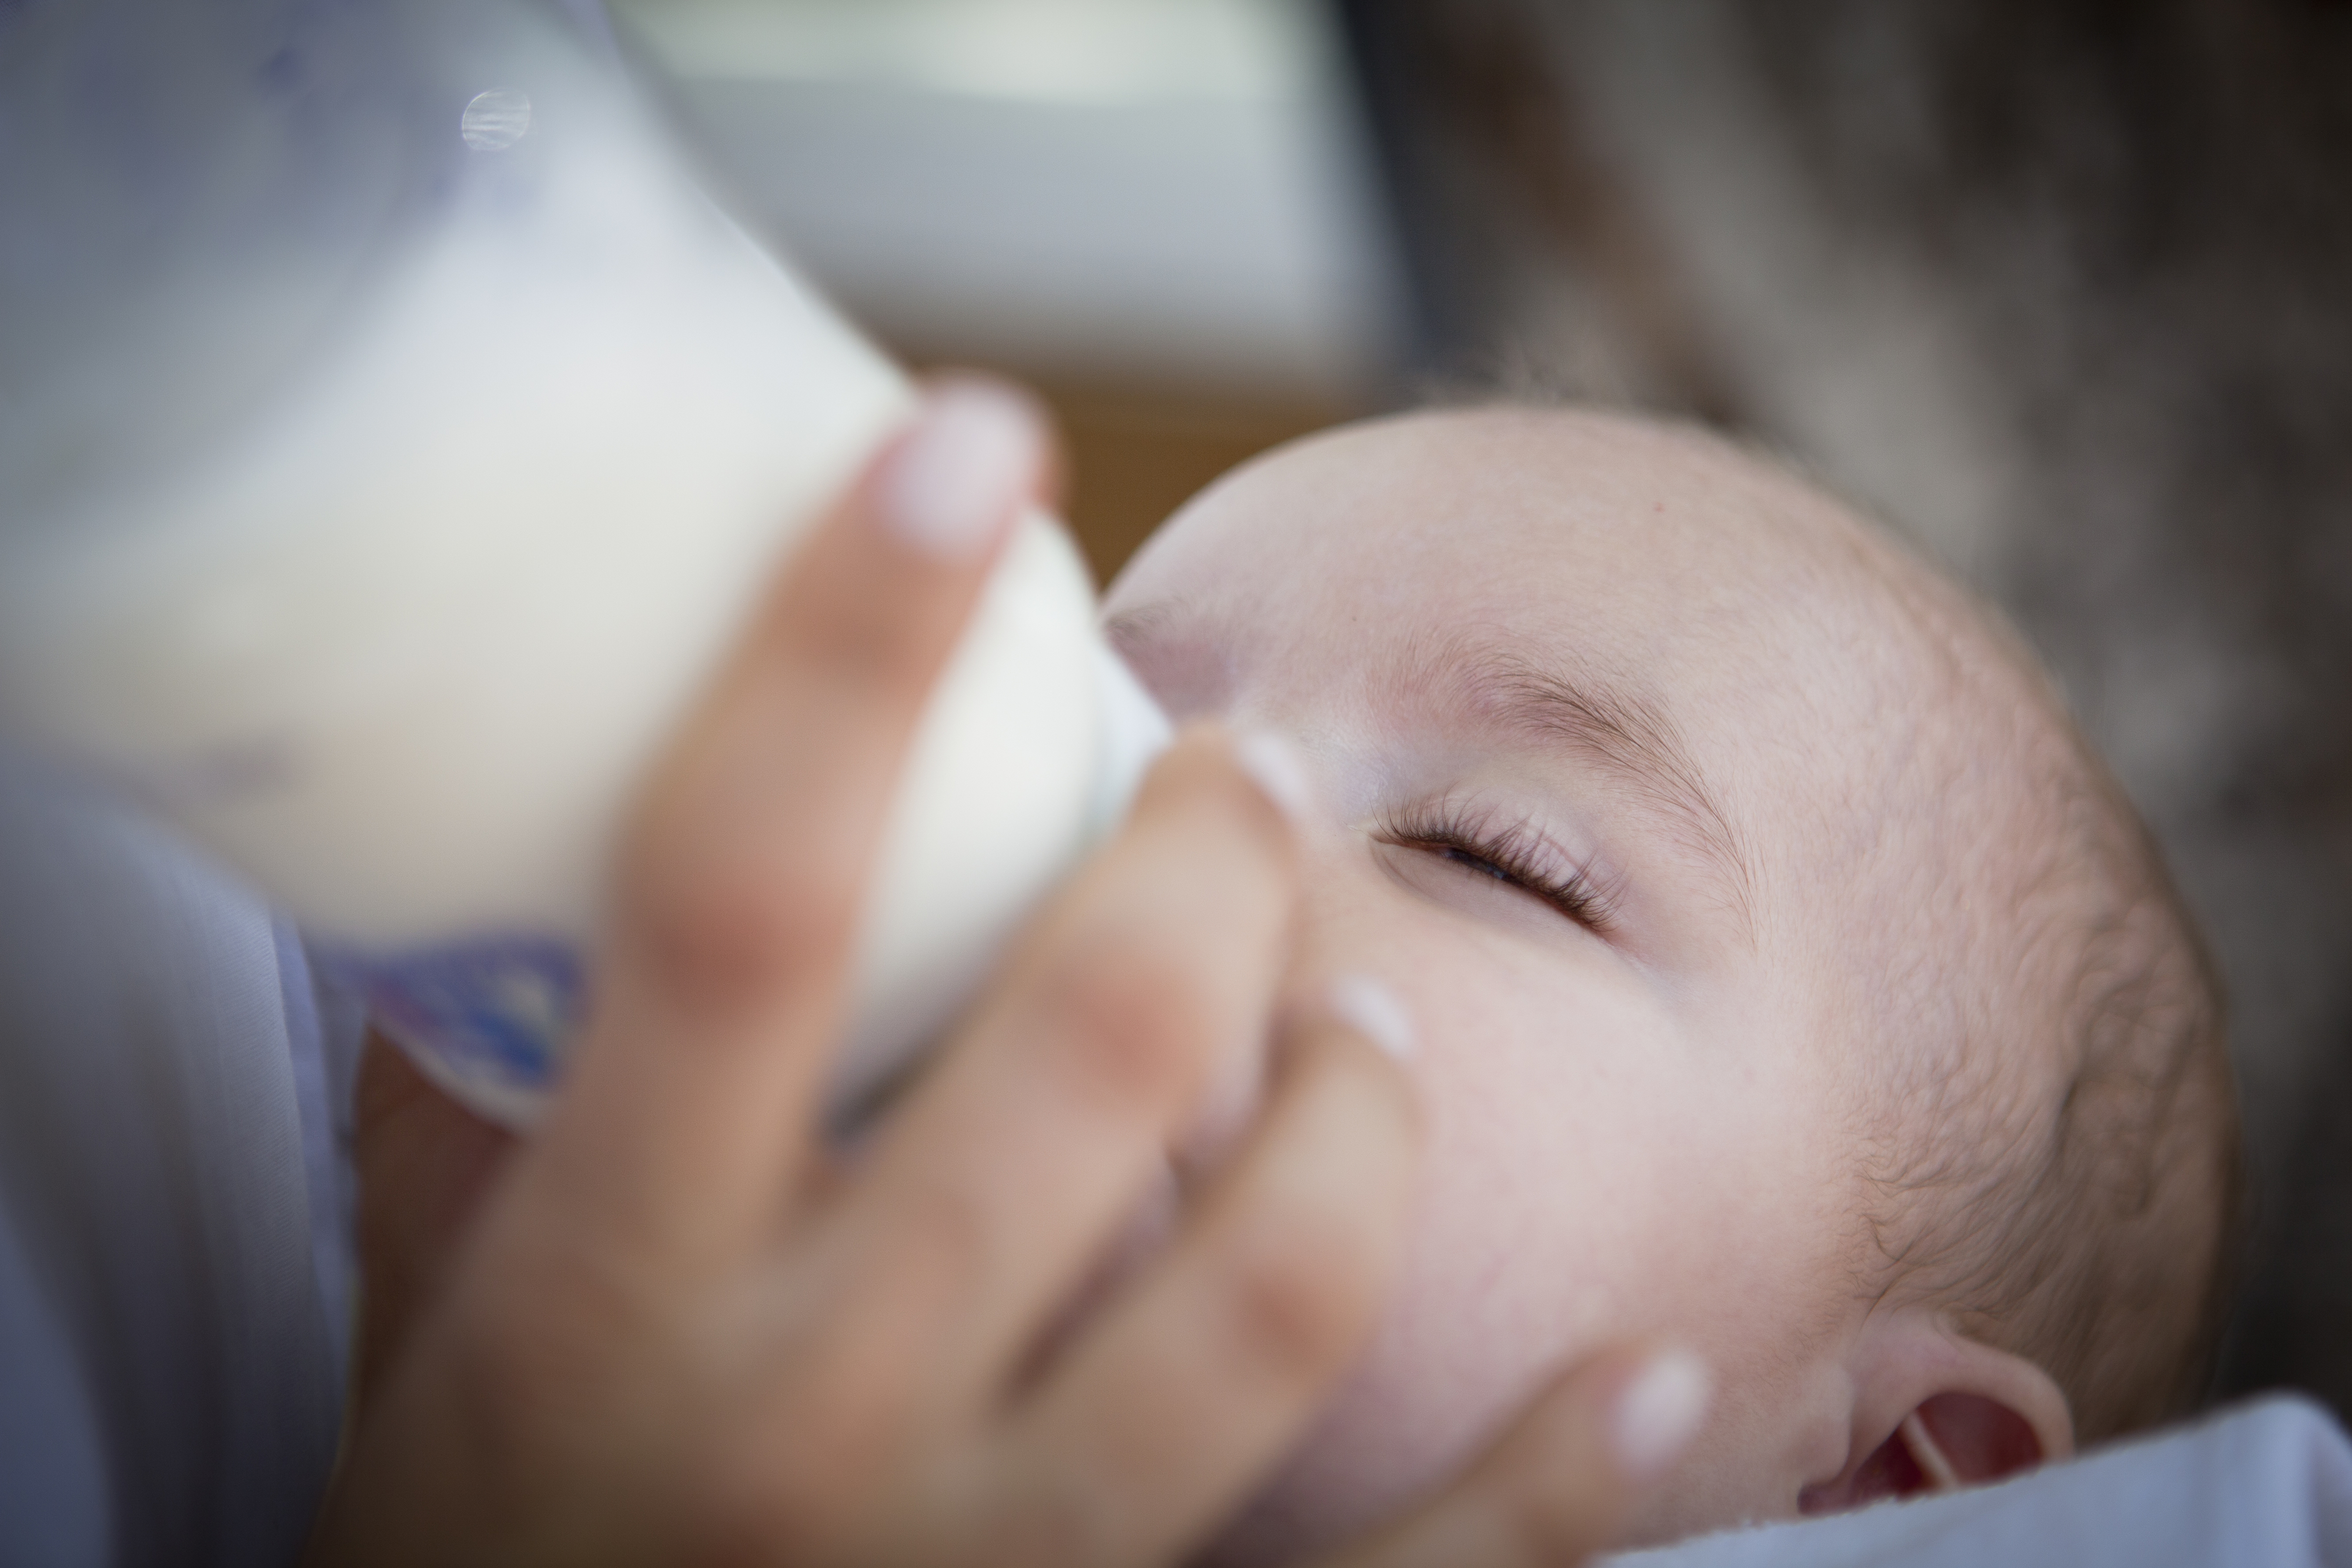 A baby being bottle-fed